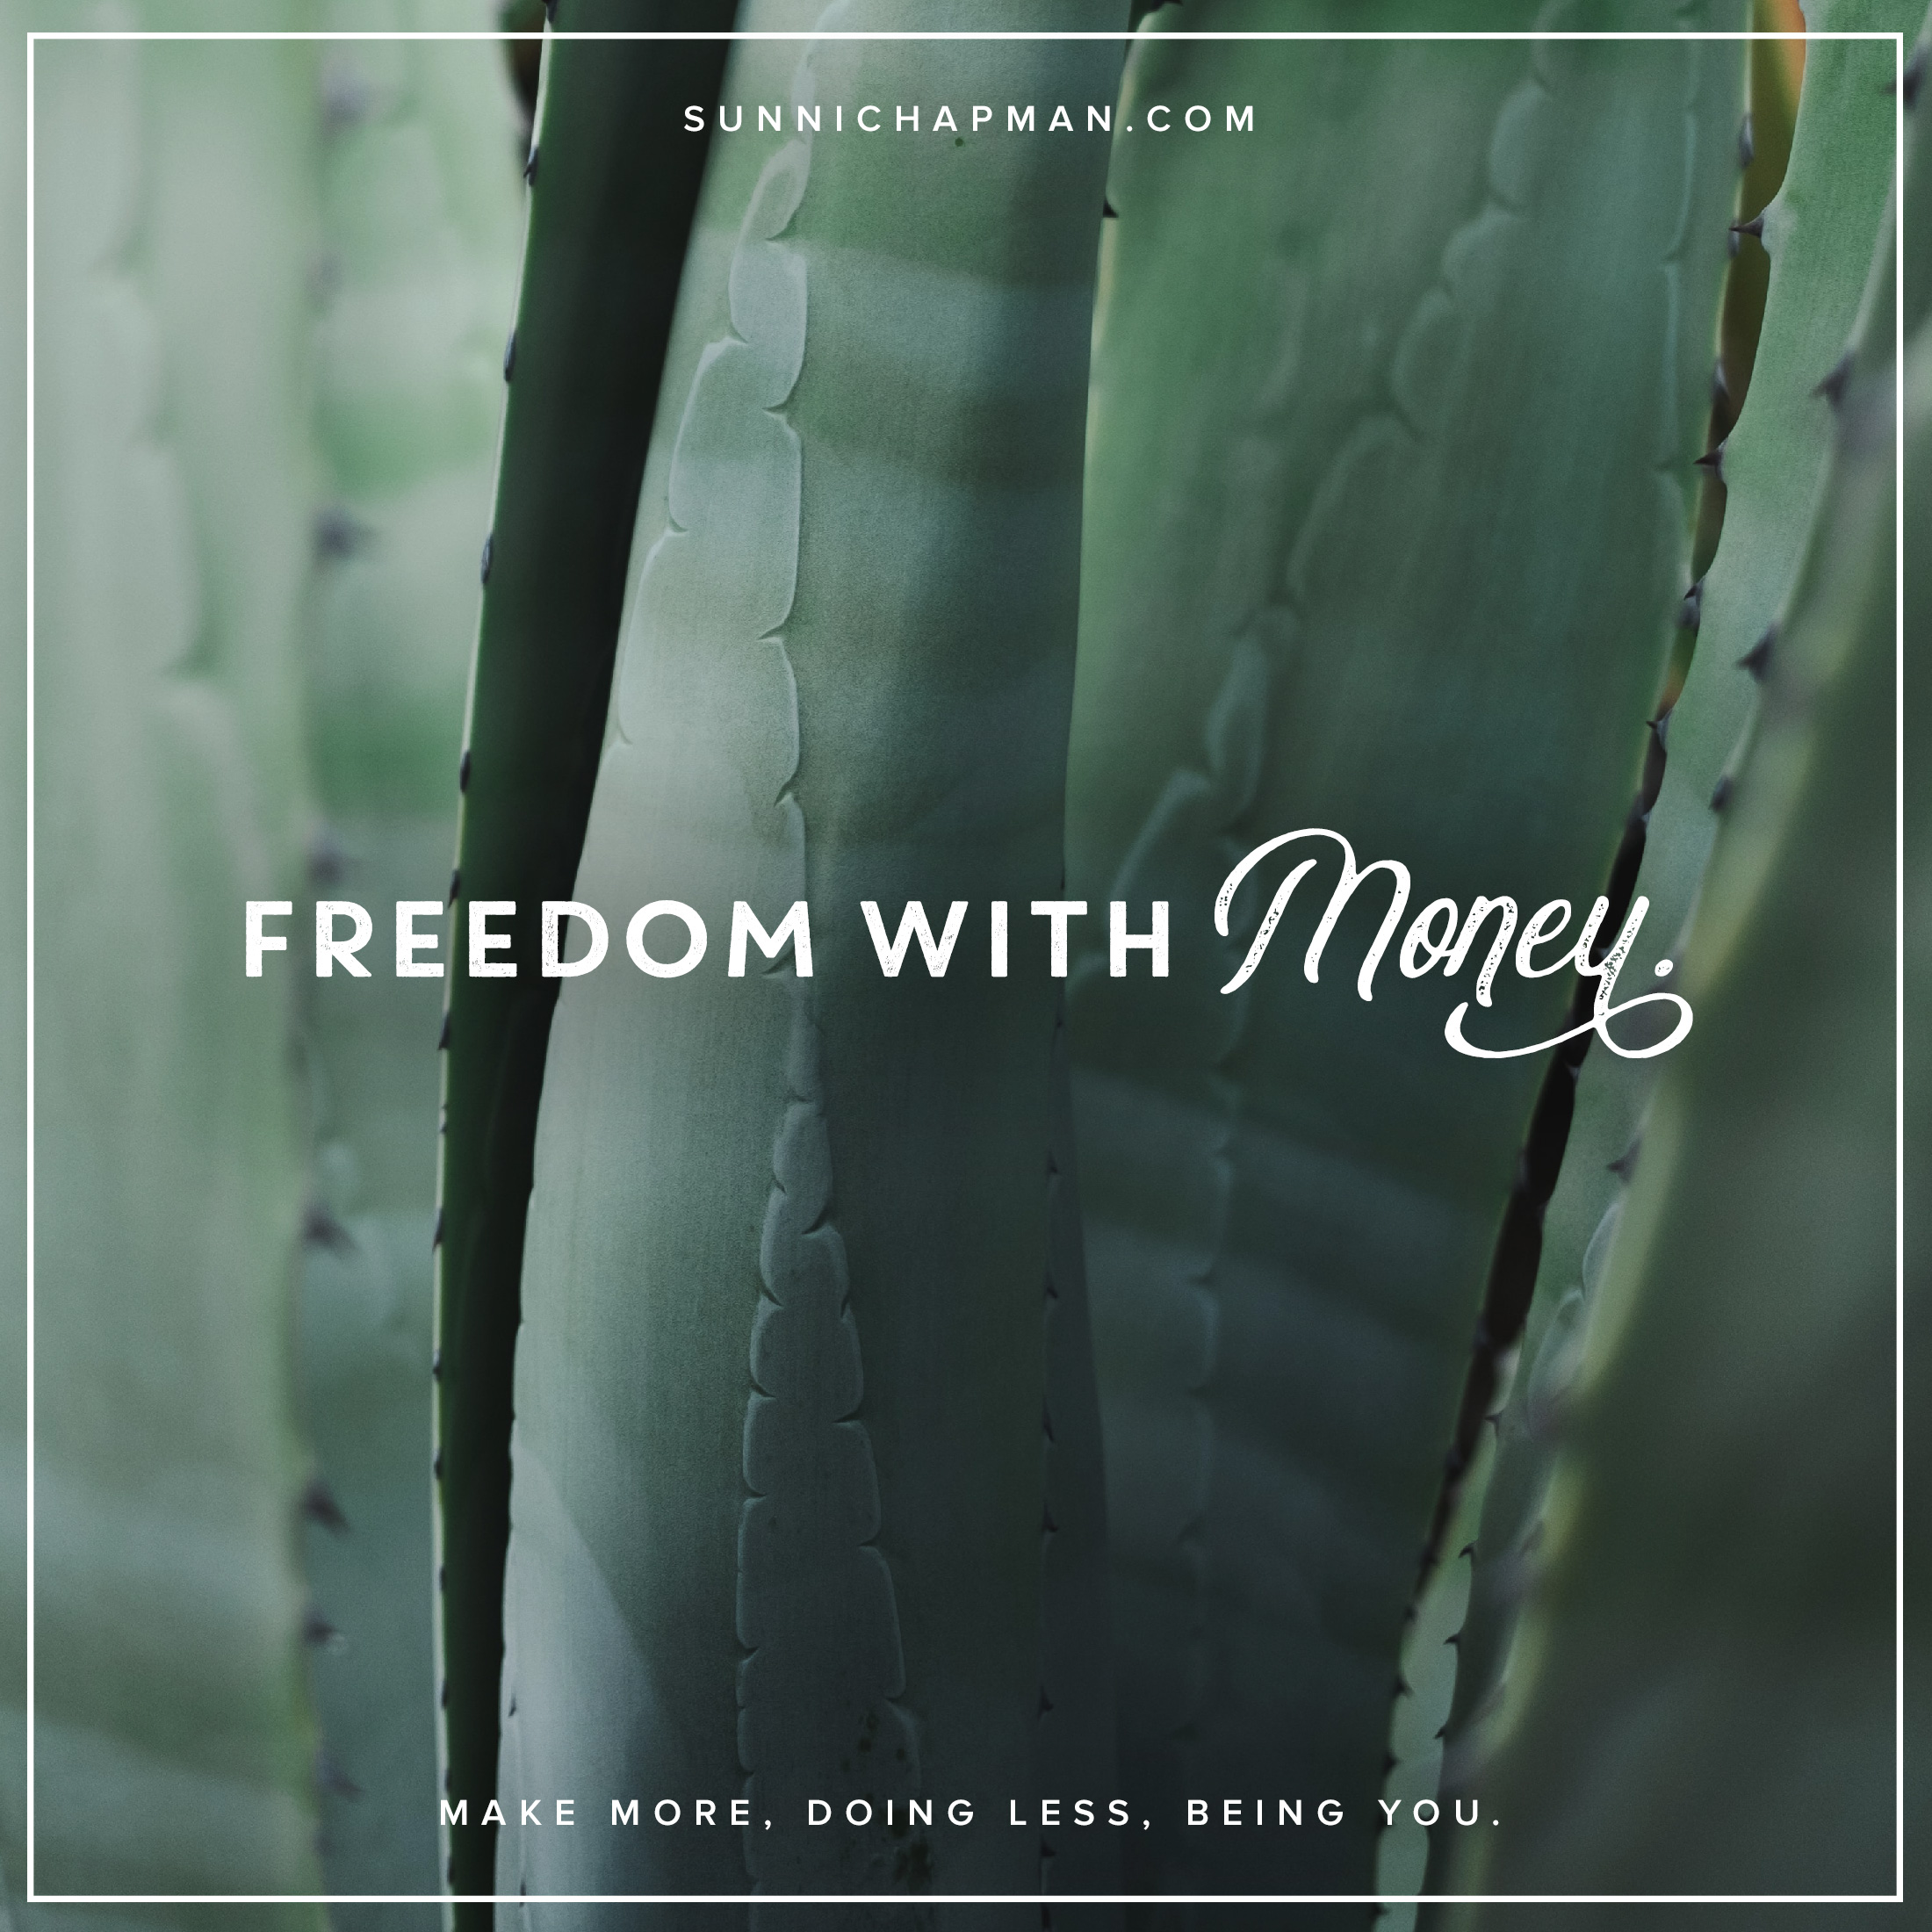 Cactus leaves in the background and text over: Freedom with money